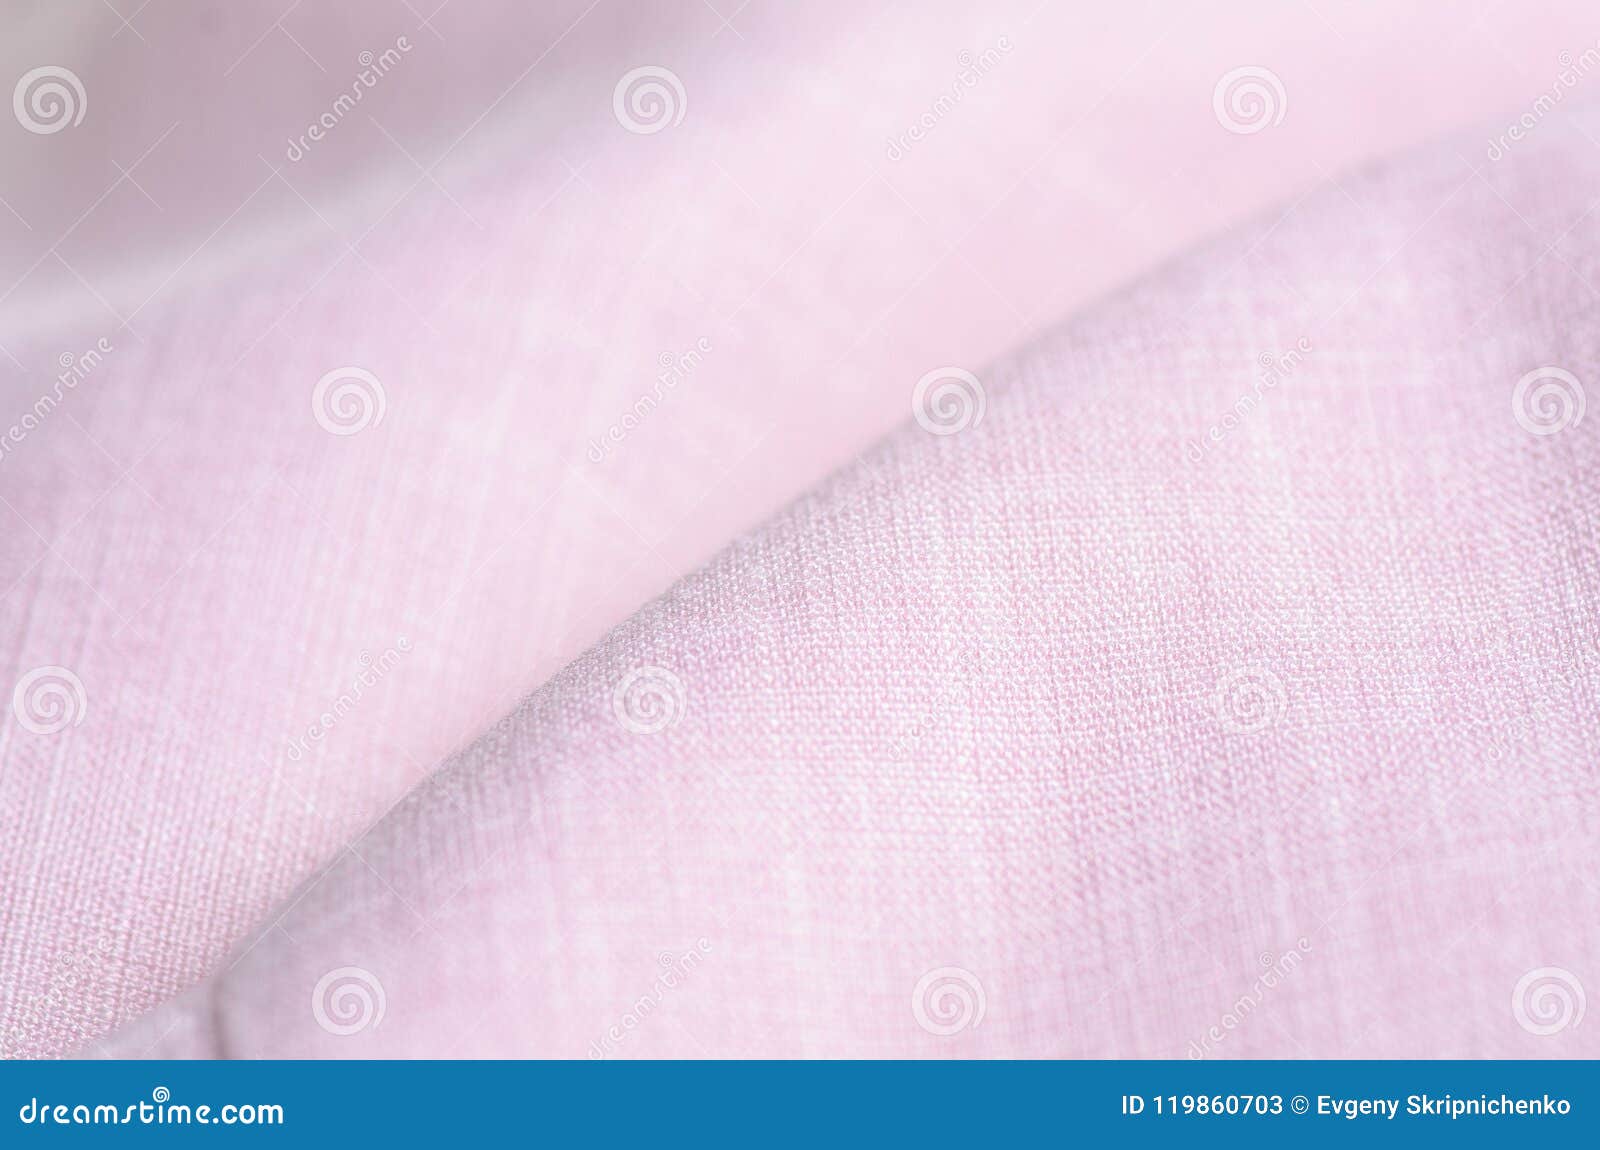 Fabric Clothing Flax Pink Macro Stock Image - Image of pattern, color ...